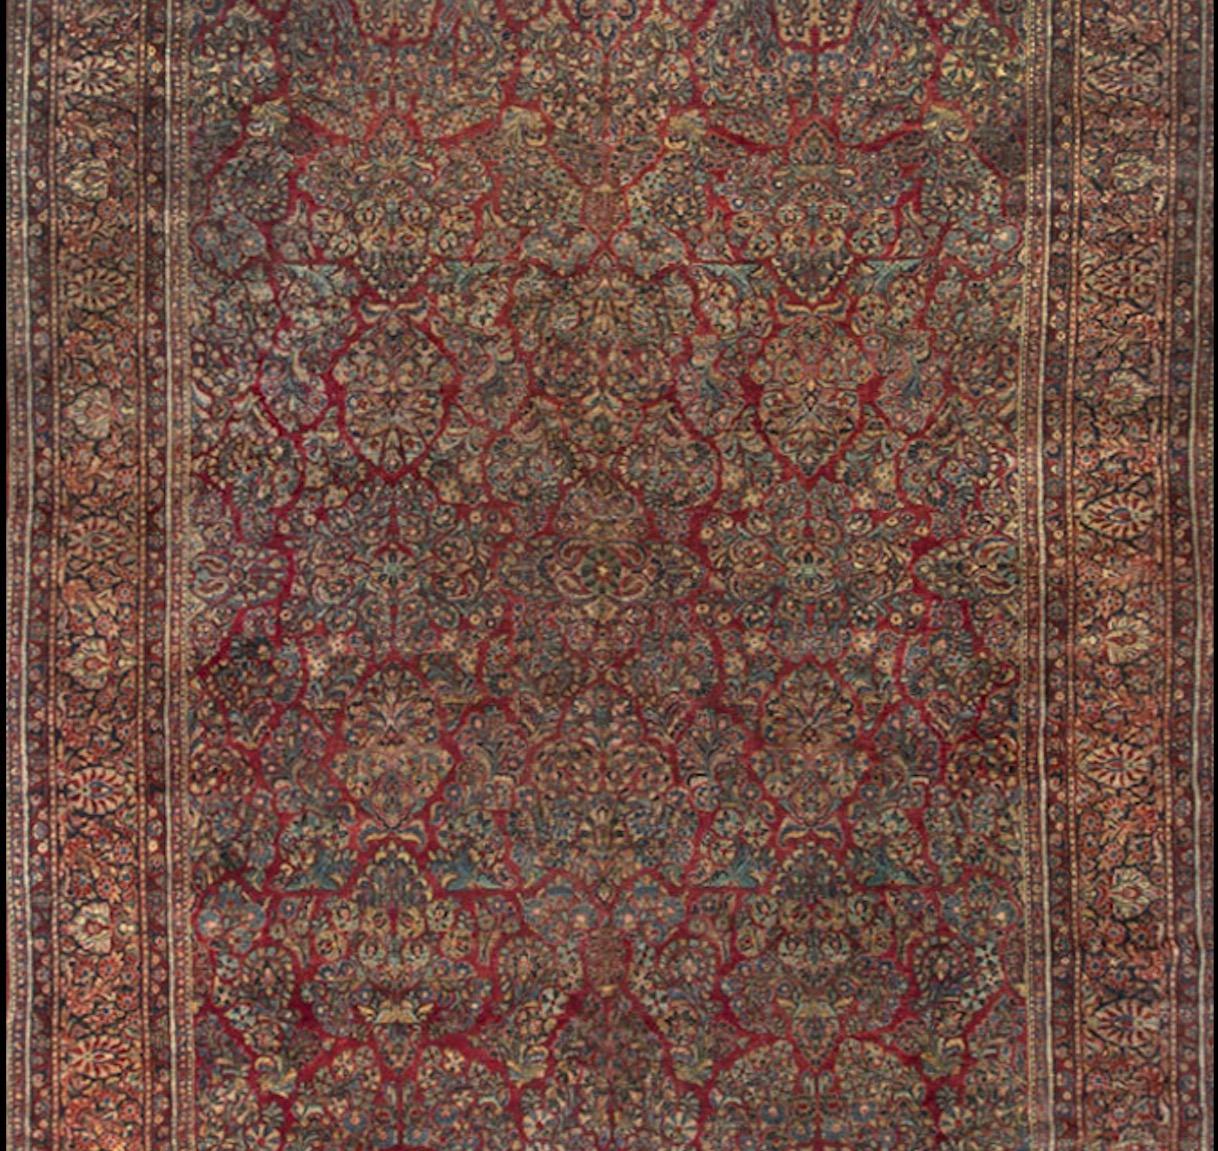 Vintage Oversize Persian Sarouk Rug, circa 1930 12'2 x 18'4 In Good Condition For Sale In Secaucus, NJ